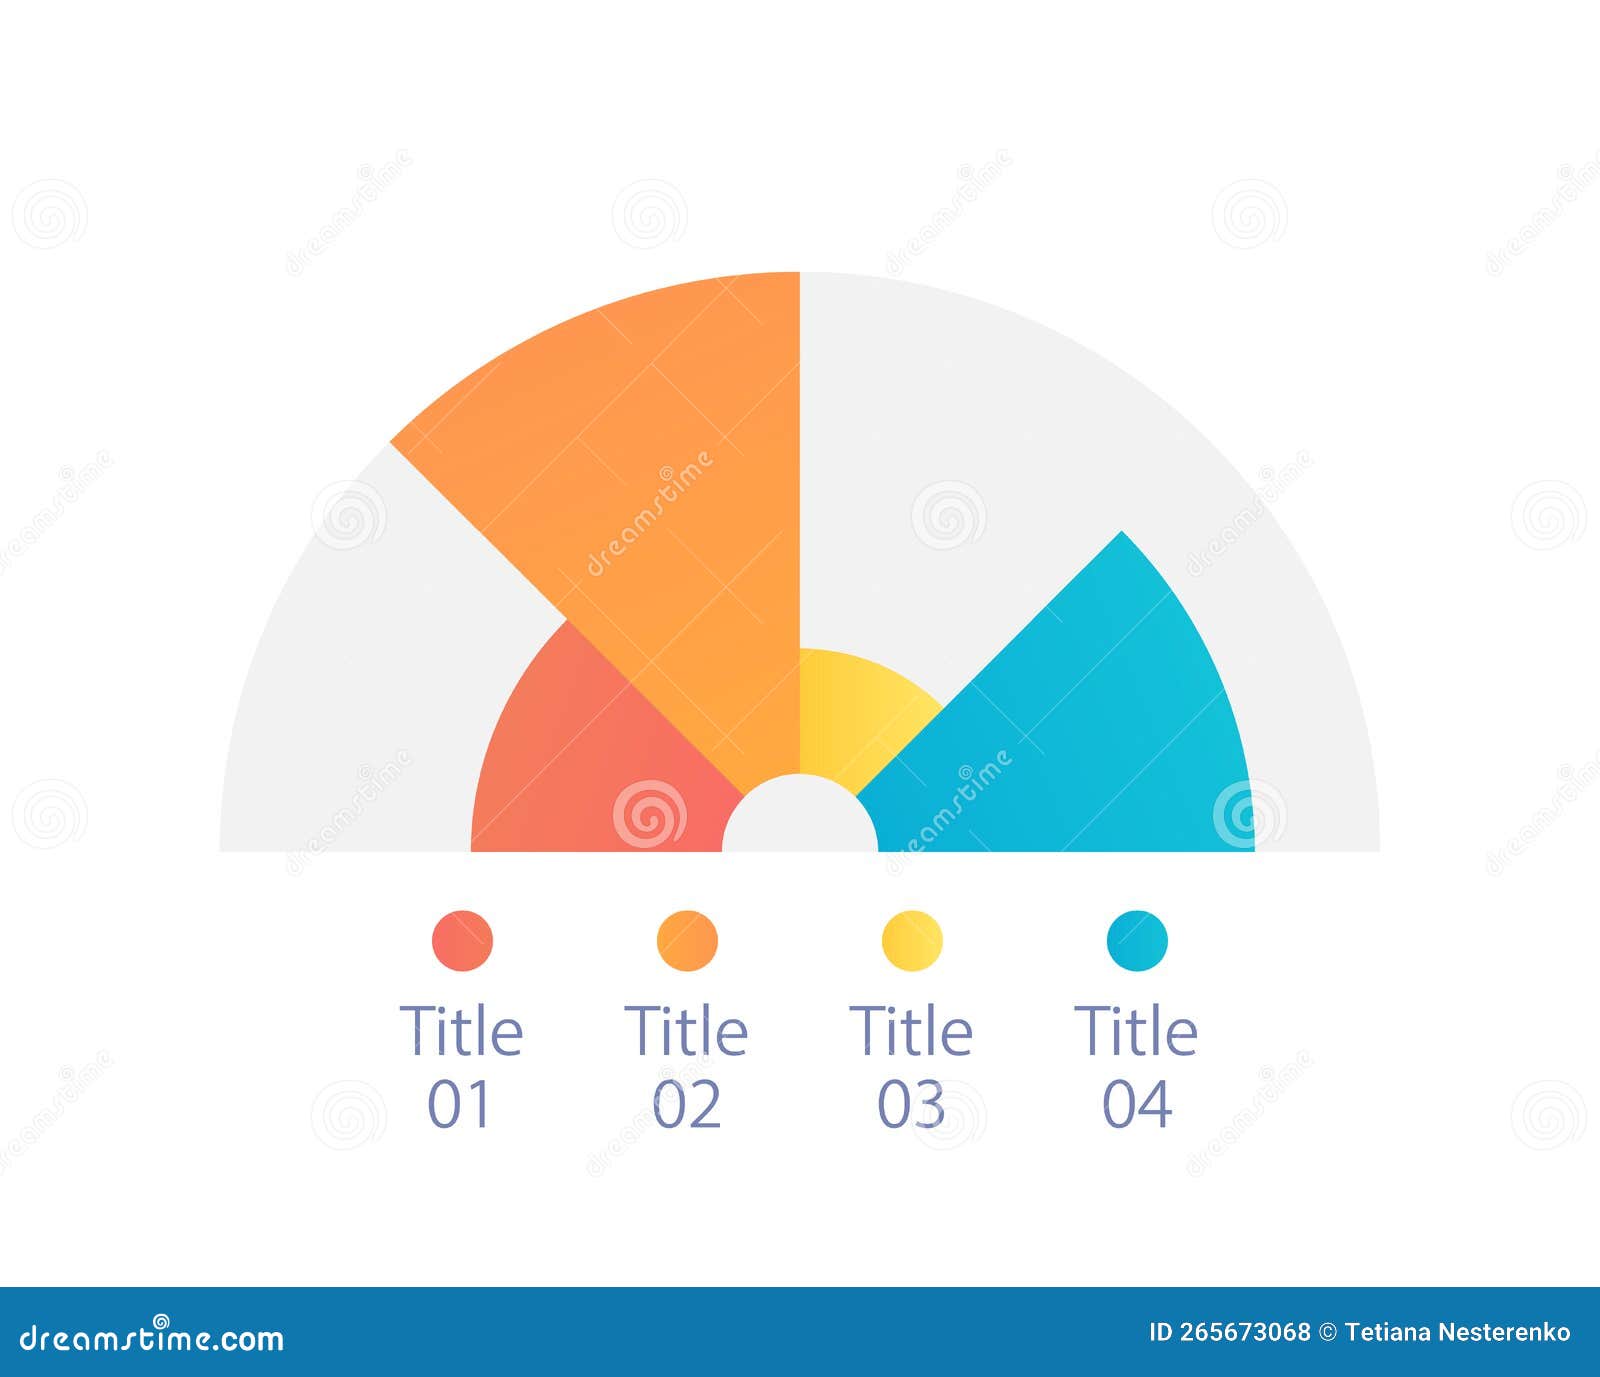 Arc Infographic Chart Design Template with Four Pies Stock Vector ...